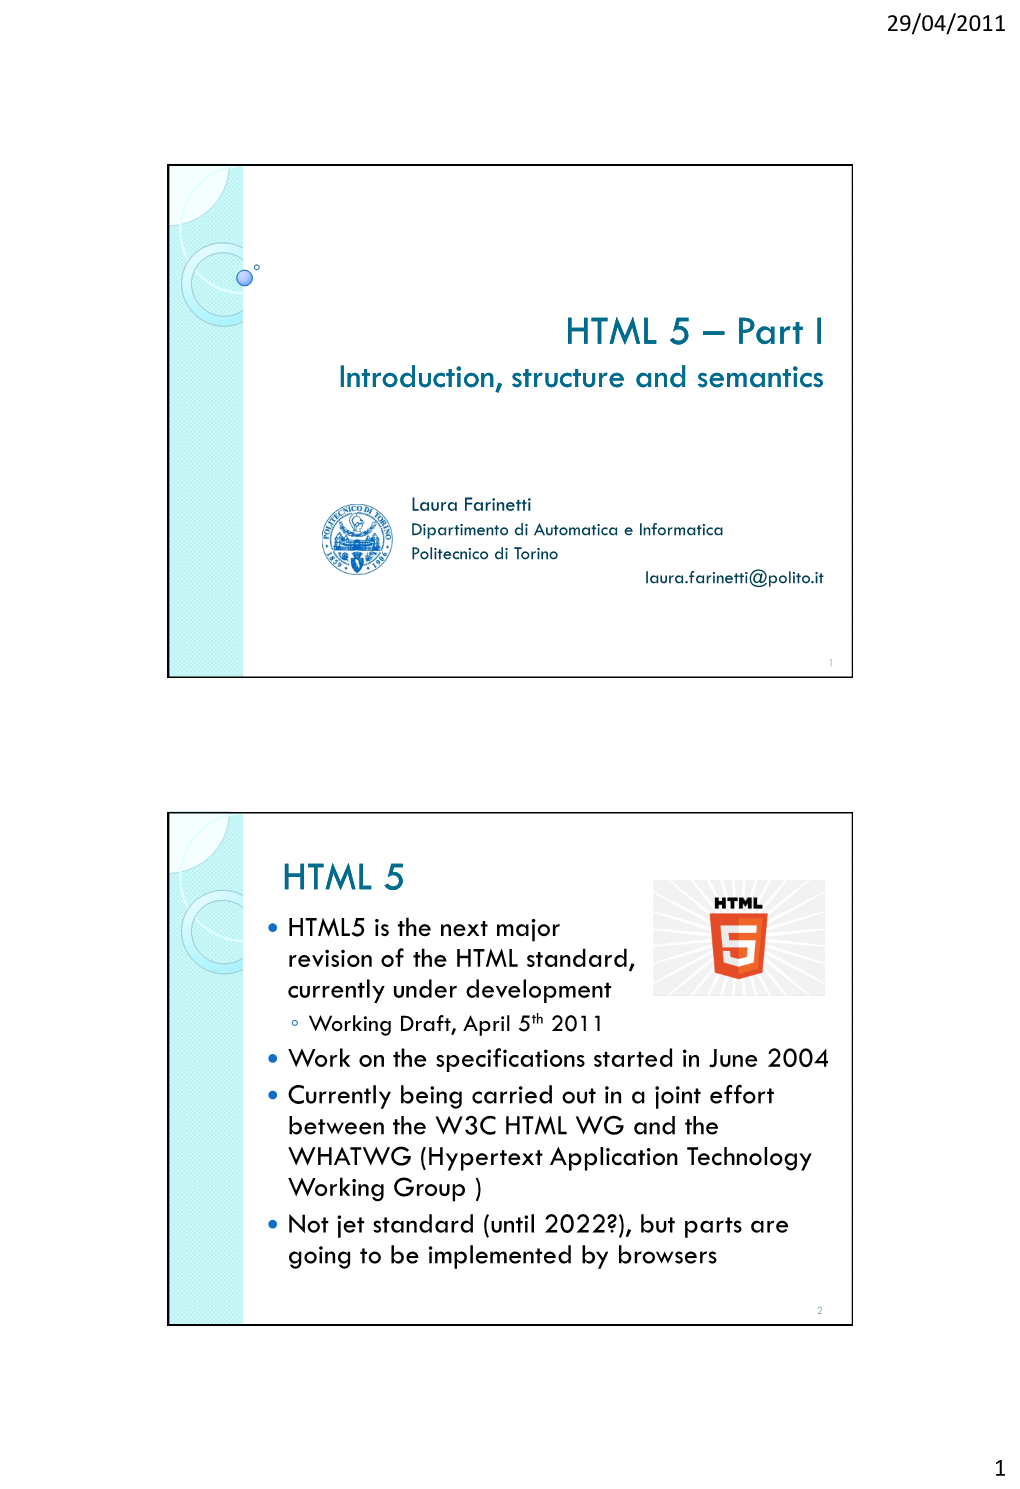 HTML 5 – Part I Introduction, Structure and Semantics